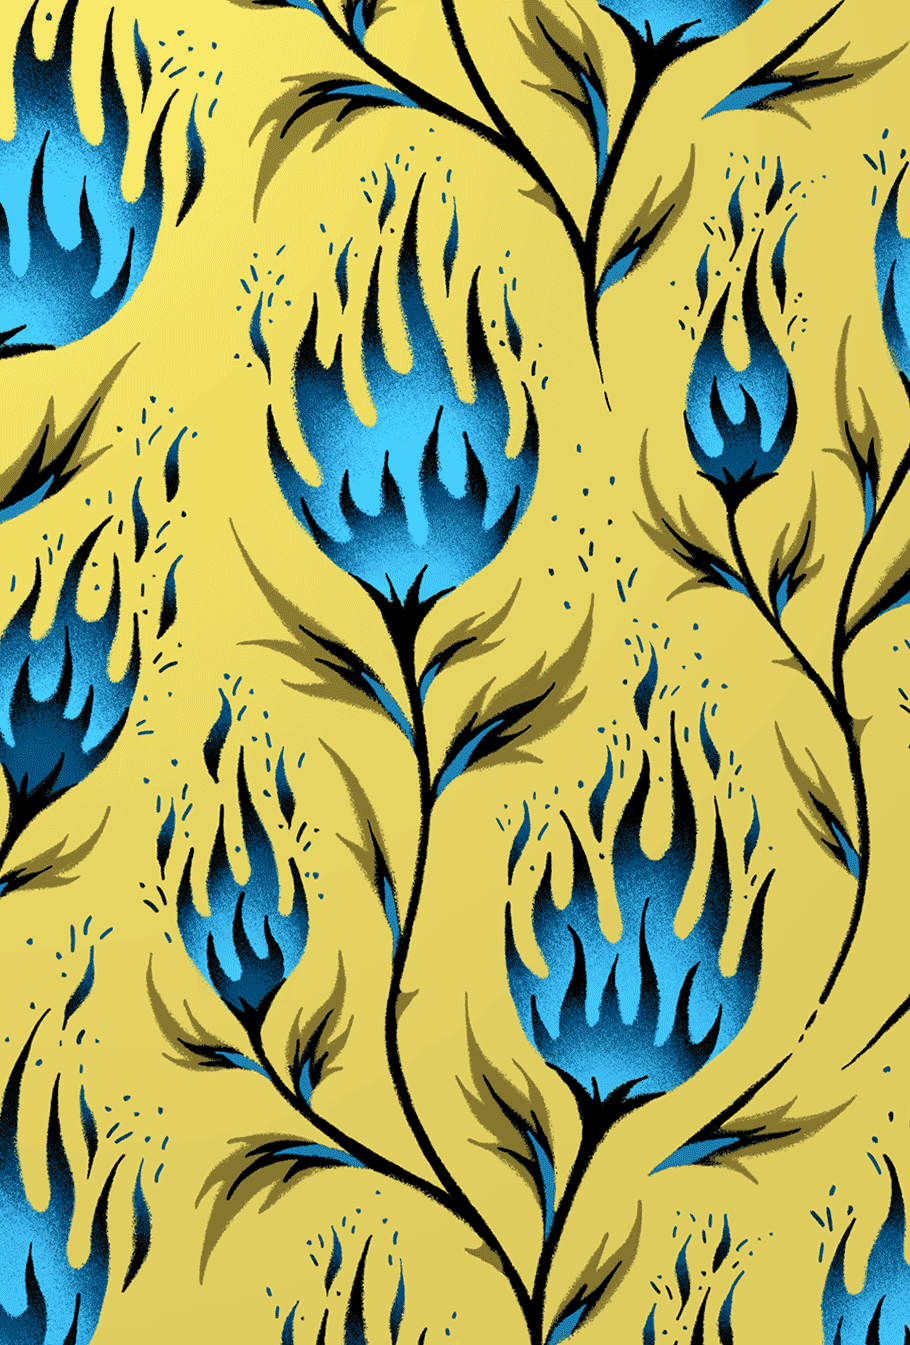 Fire flower yellow blue floral pattern by Andrea Muller